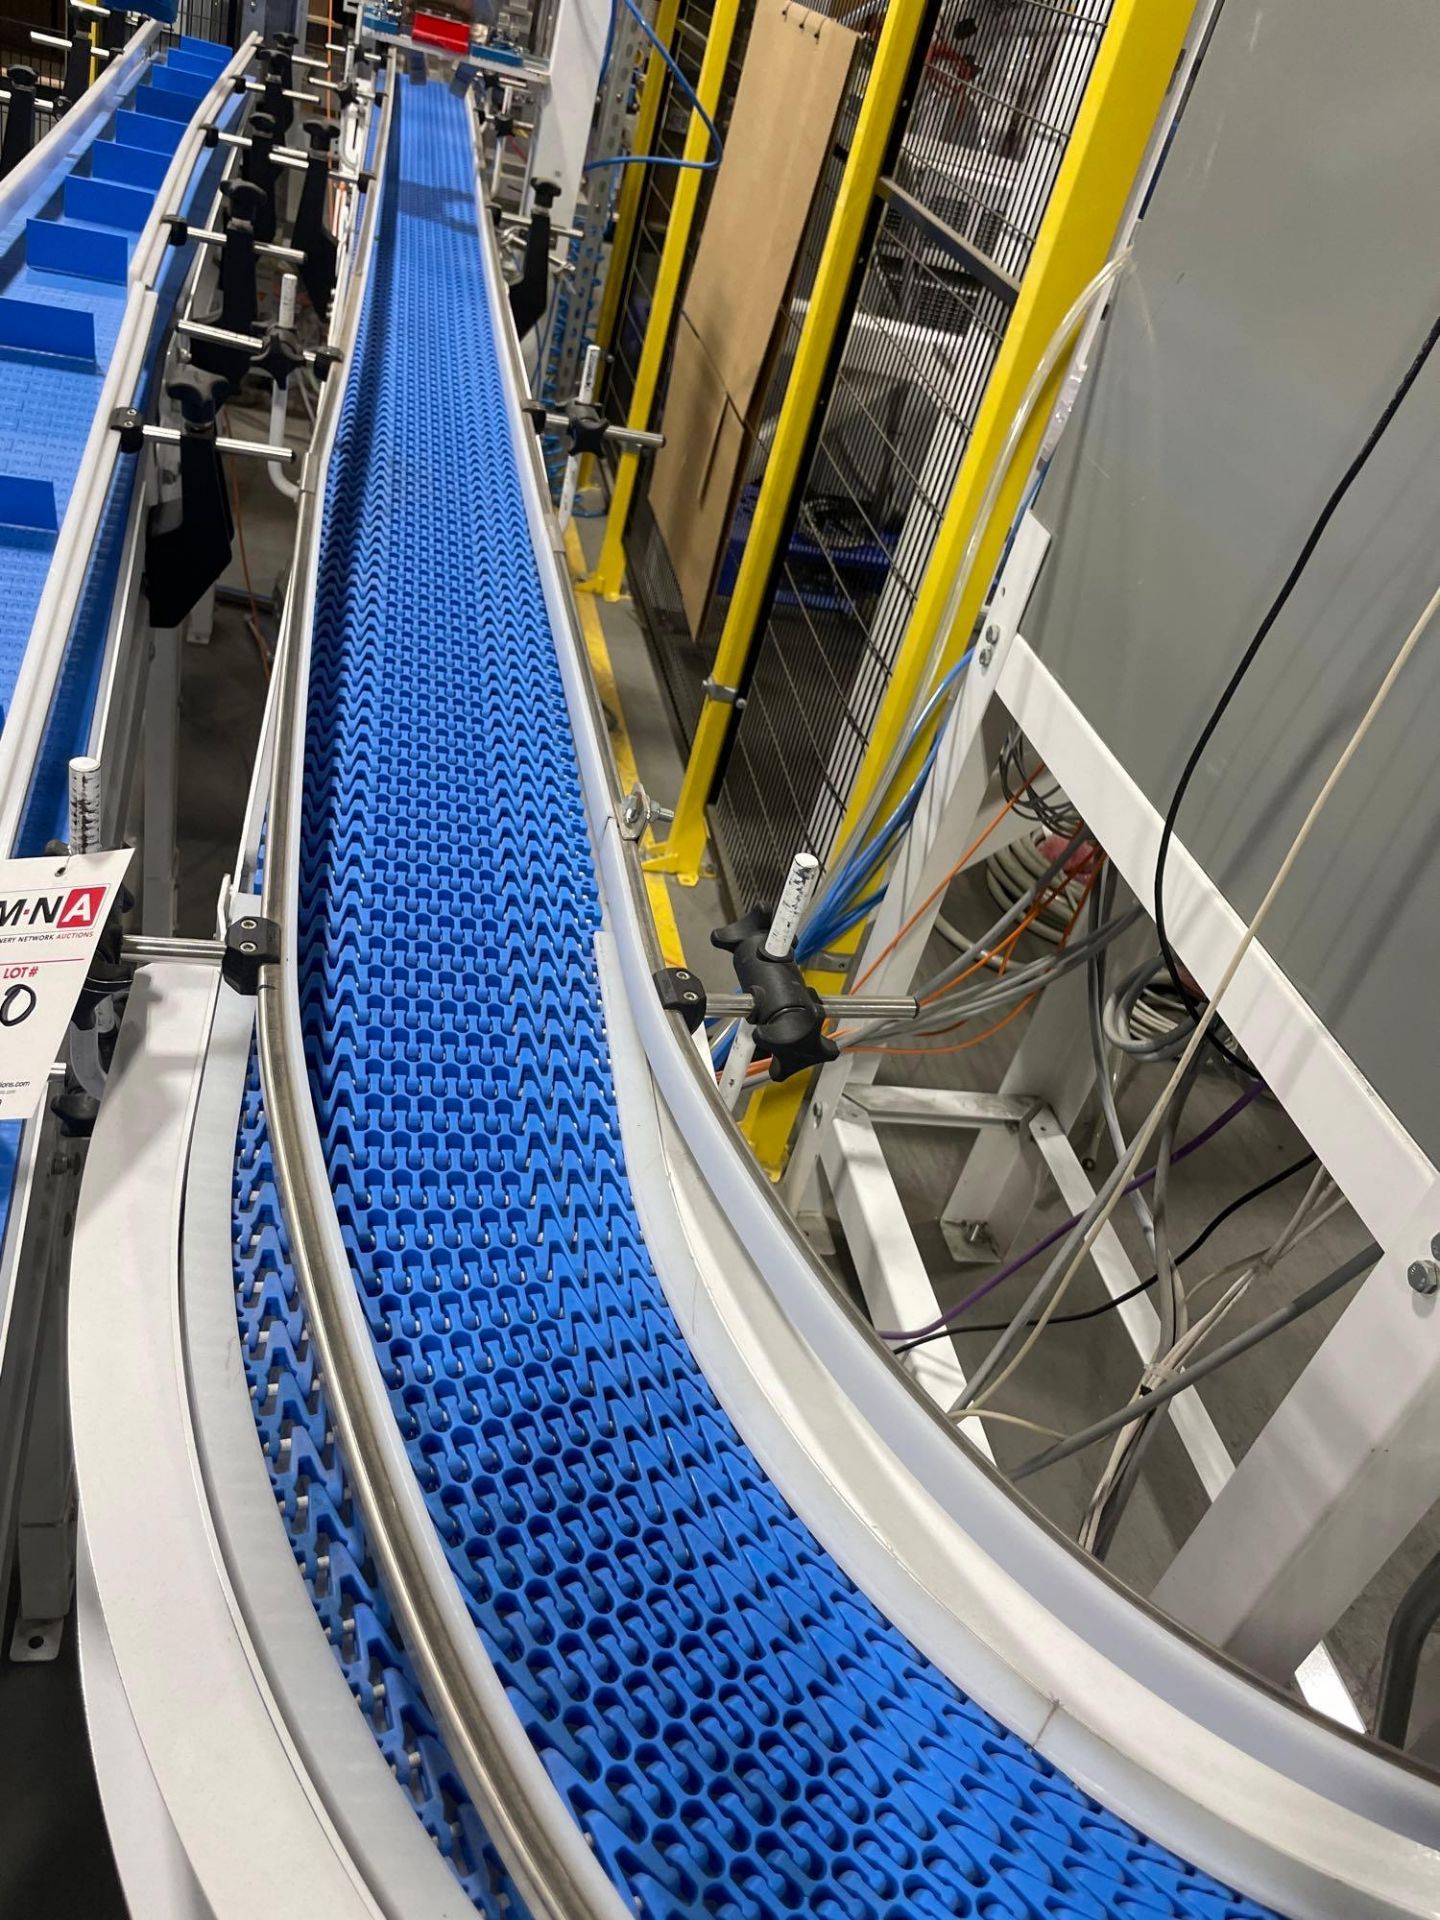 Kaitech Automation Conveyor System, 7” Wide x 17ft Long, New 2020 - Image 3 of 6